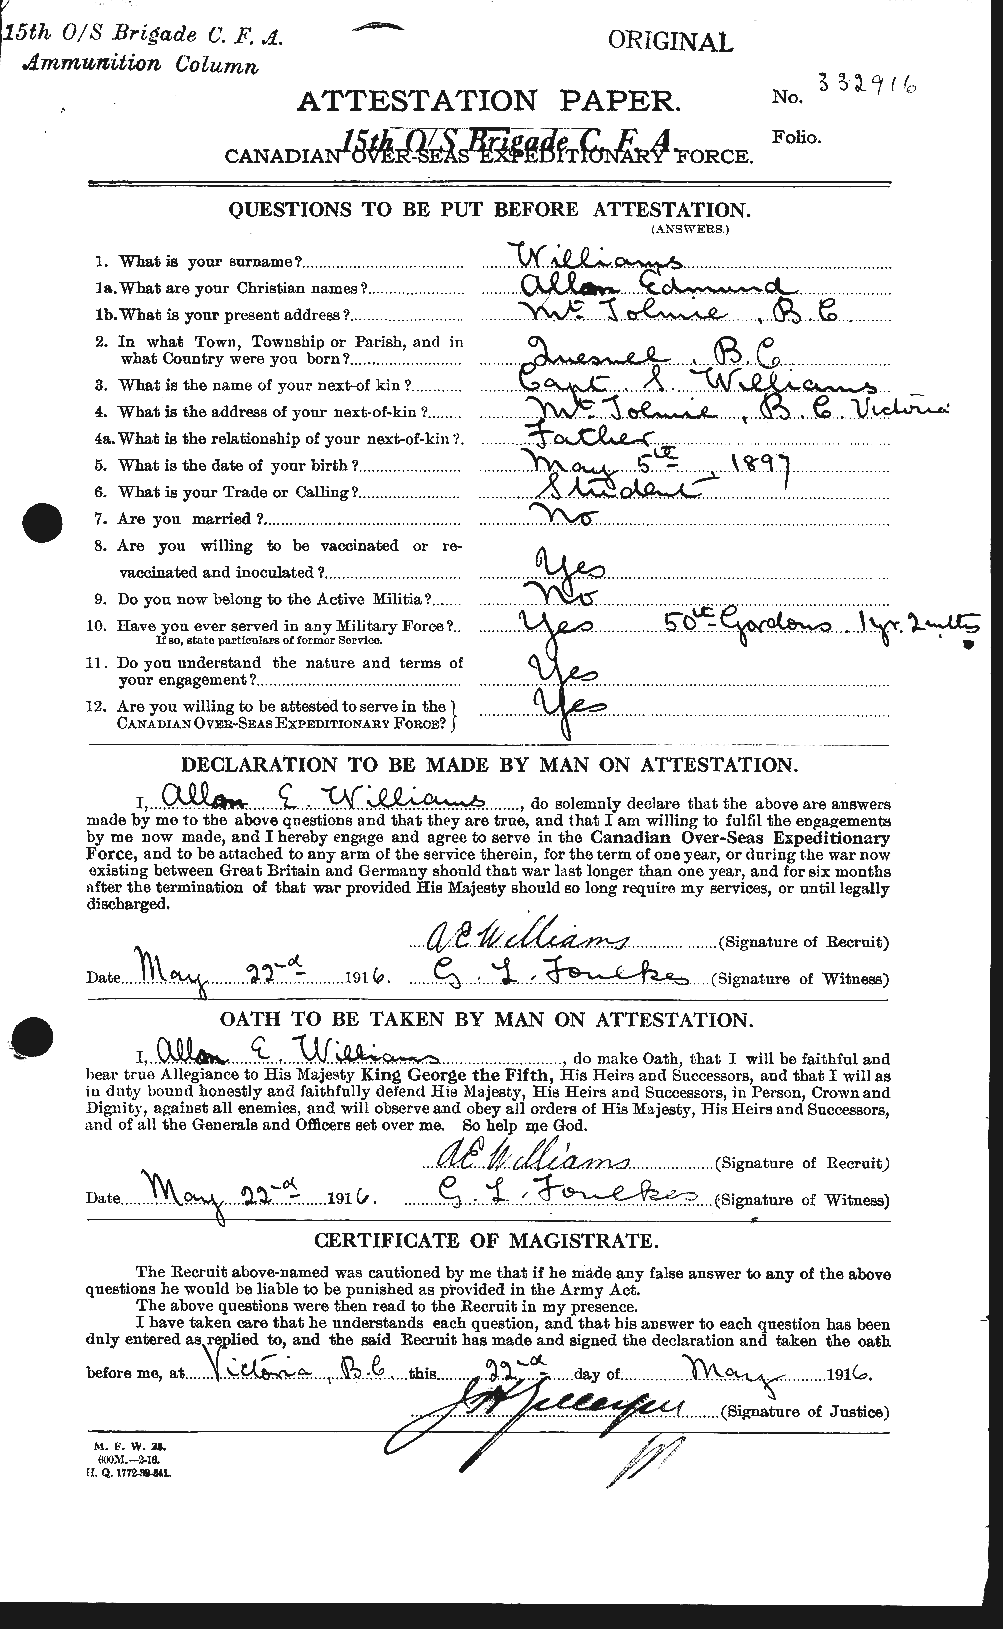 Personnel Records of the First World War - CEF 674229a